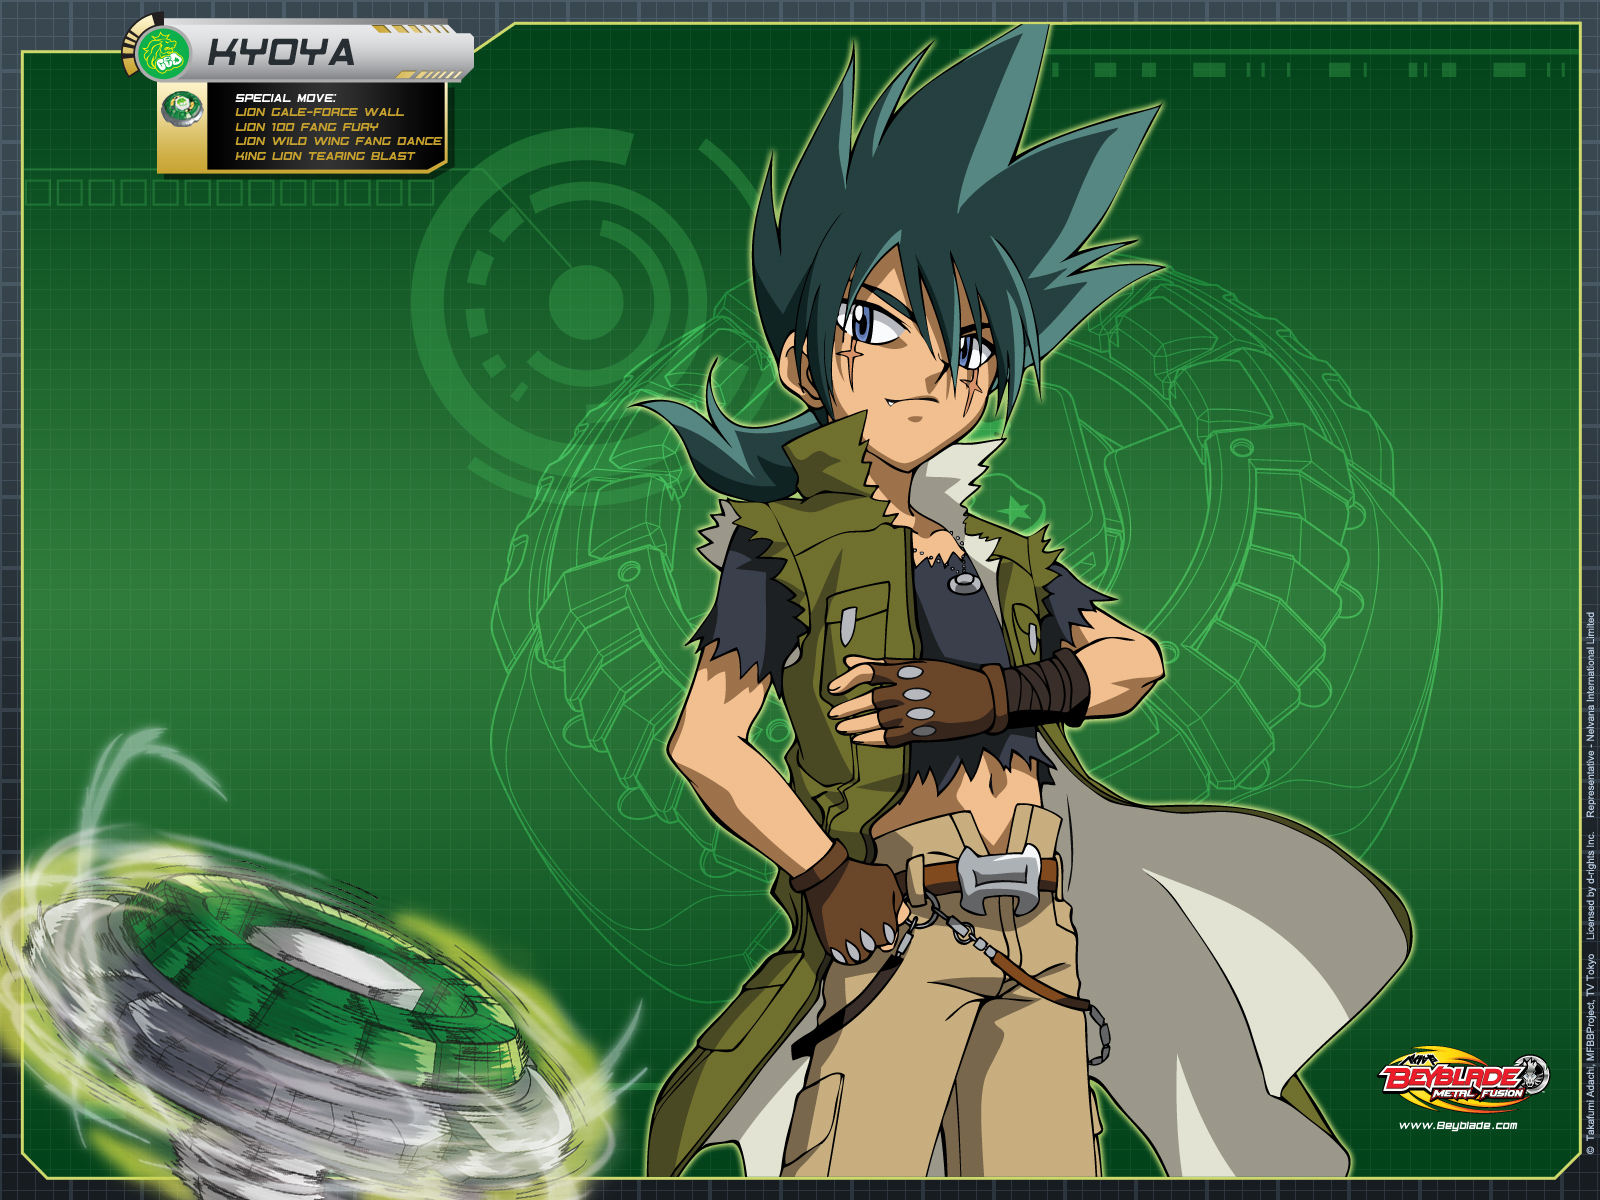 Beyblade Metal Pictures